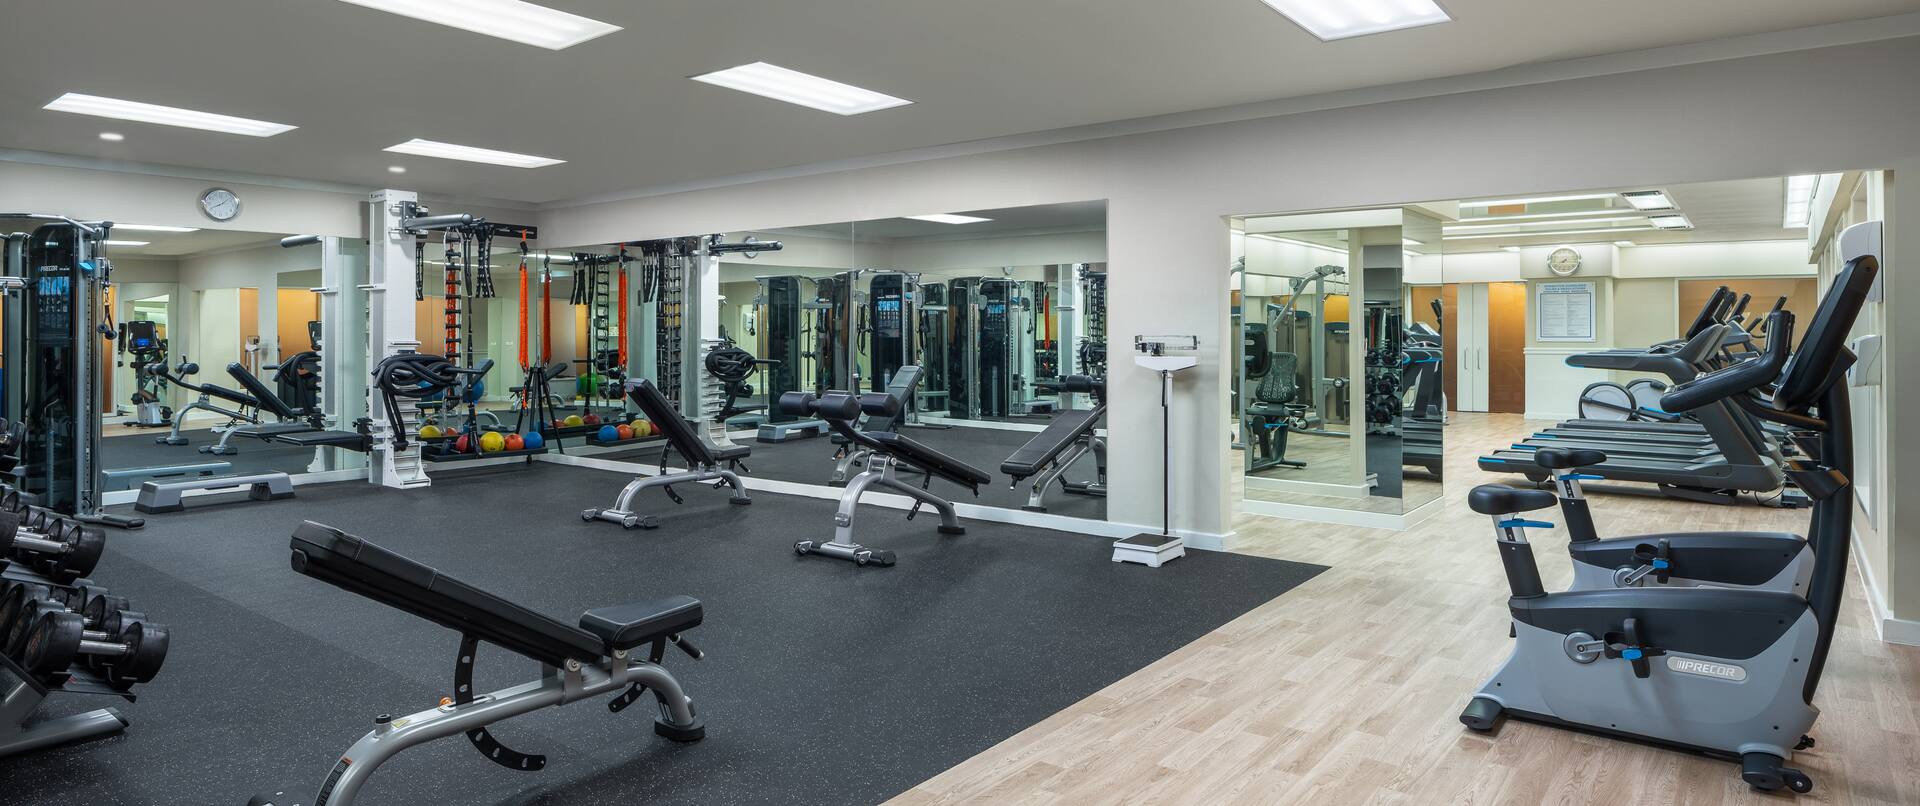 Fitness center with benches and mirrors